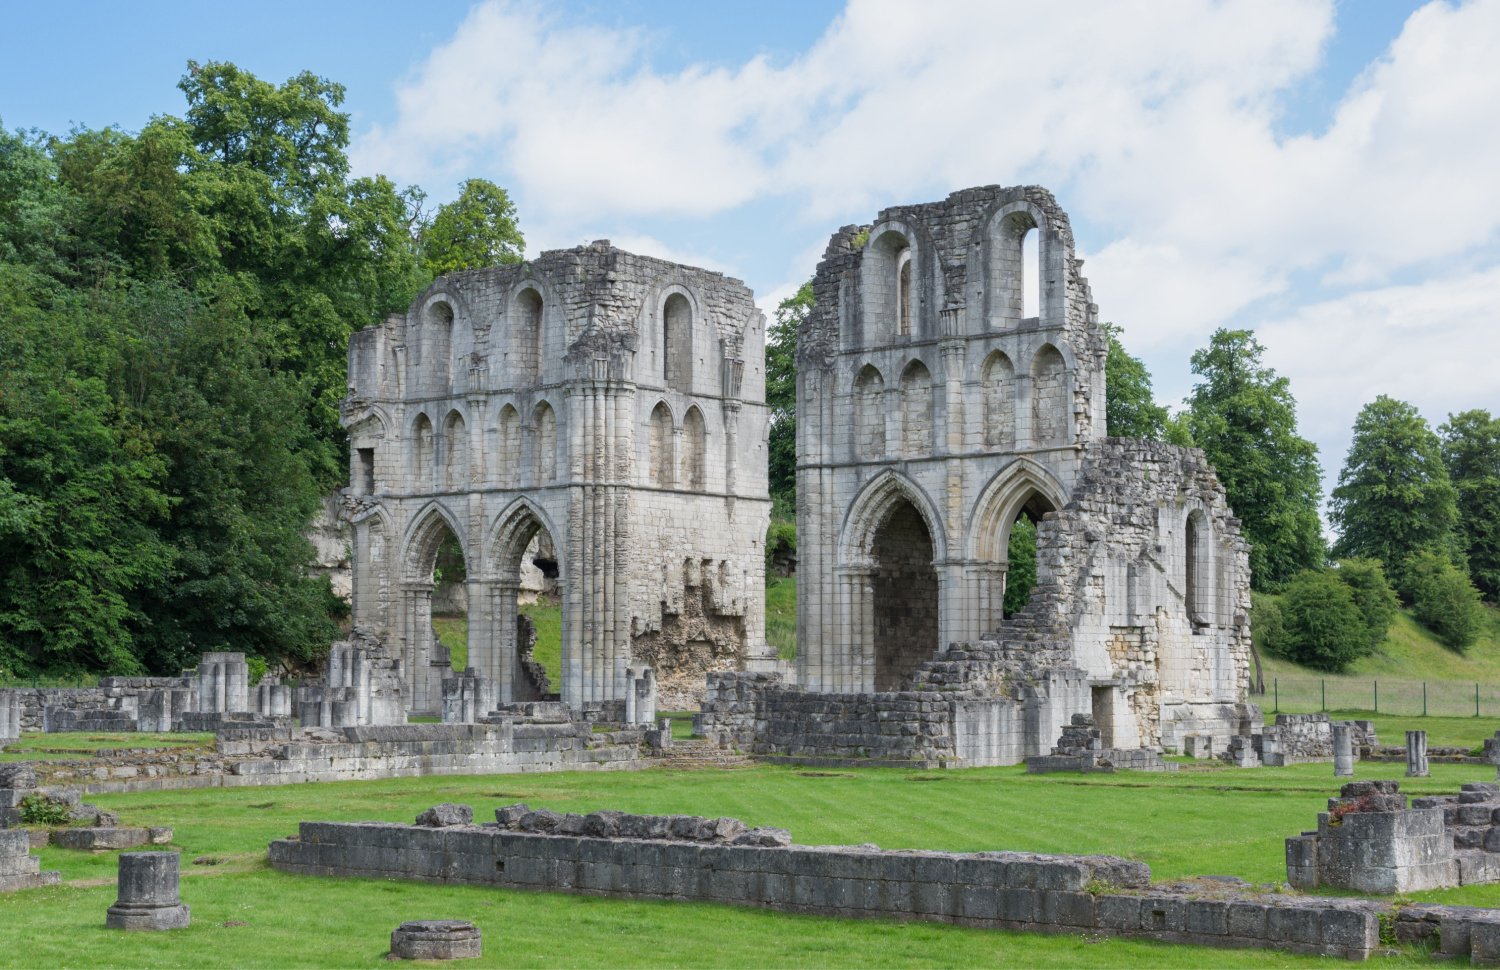 Image name roche abbey maltby south yorkshire the 7 image from the post Maltby, South Yorkshire in Yorkshire.com.